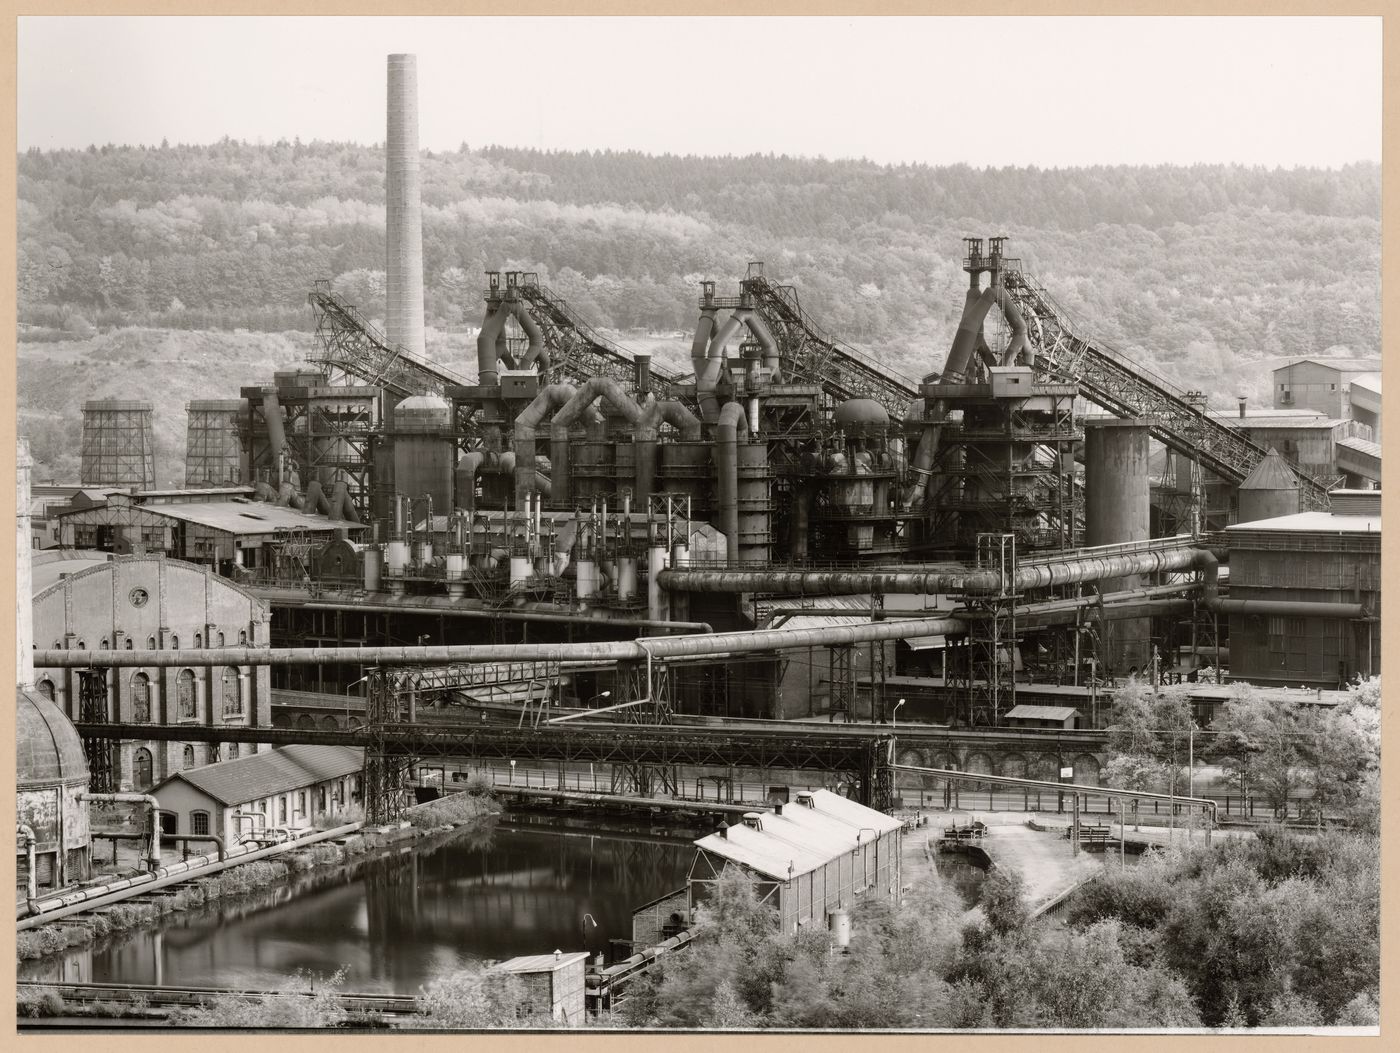 General view of Arbed steel mill, Terre Rouge, Esch-sur-Alzette, Luxembourg